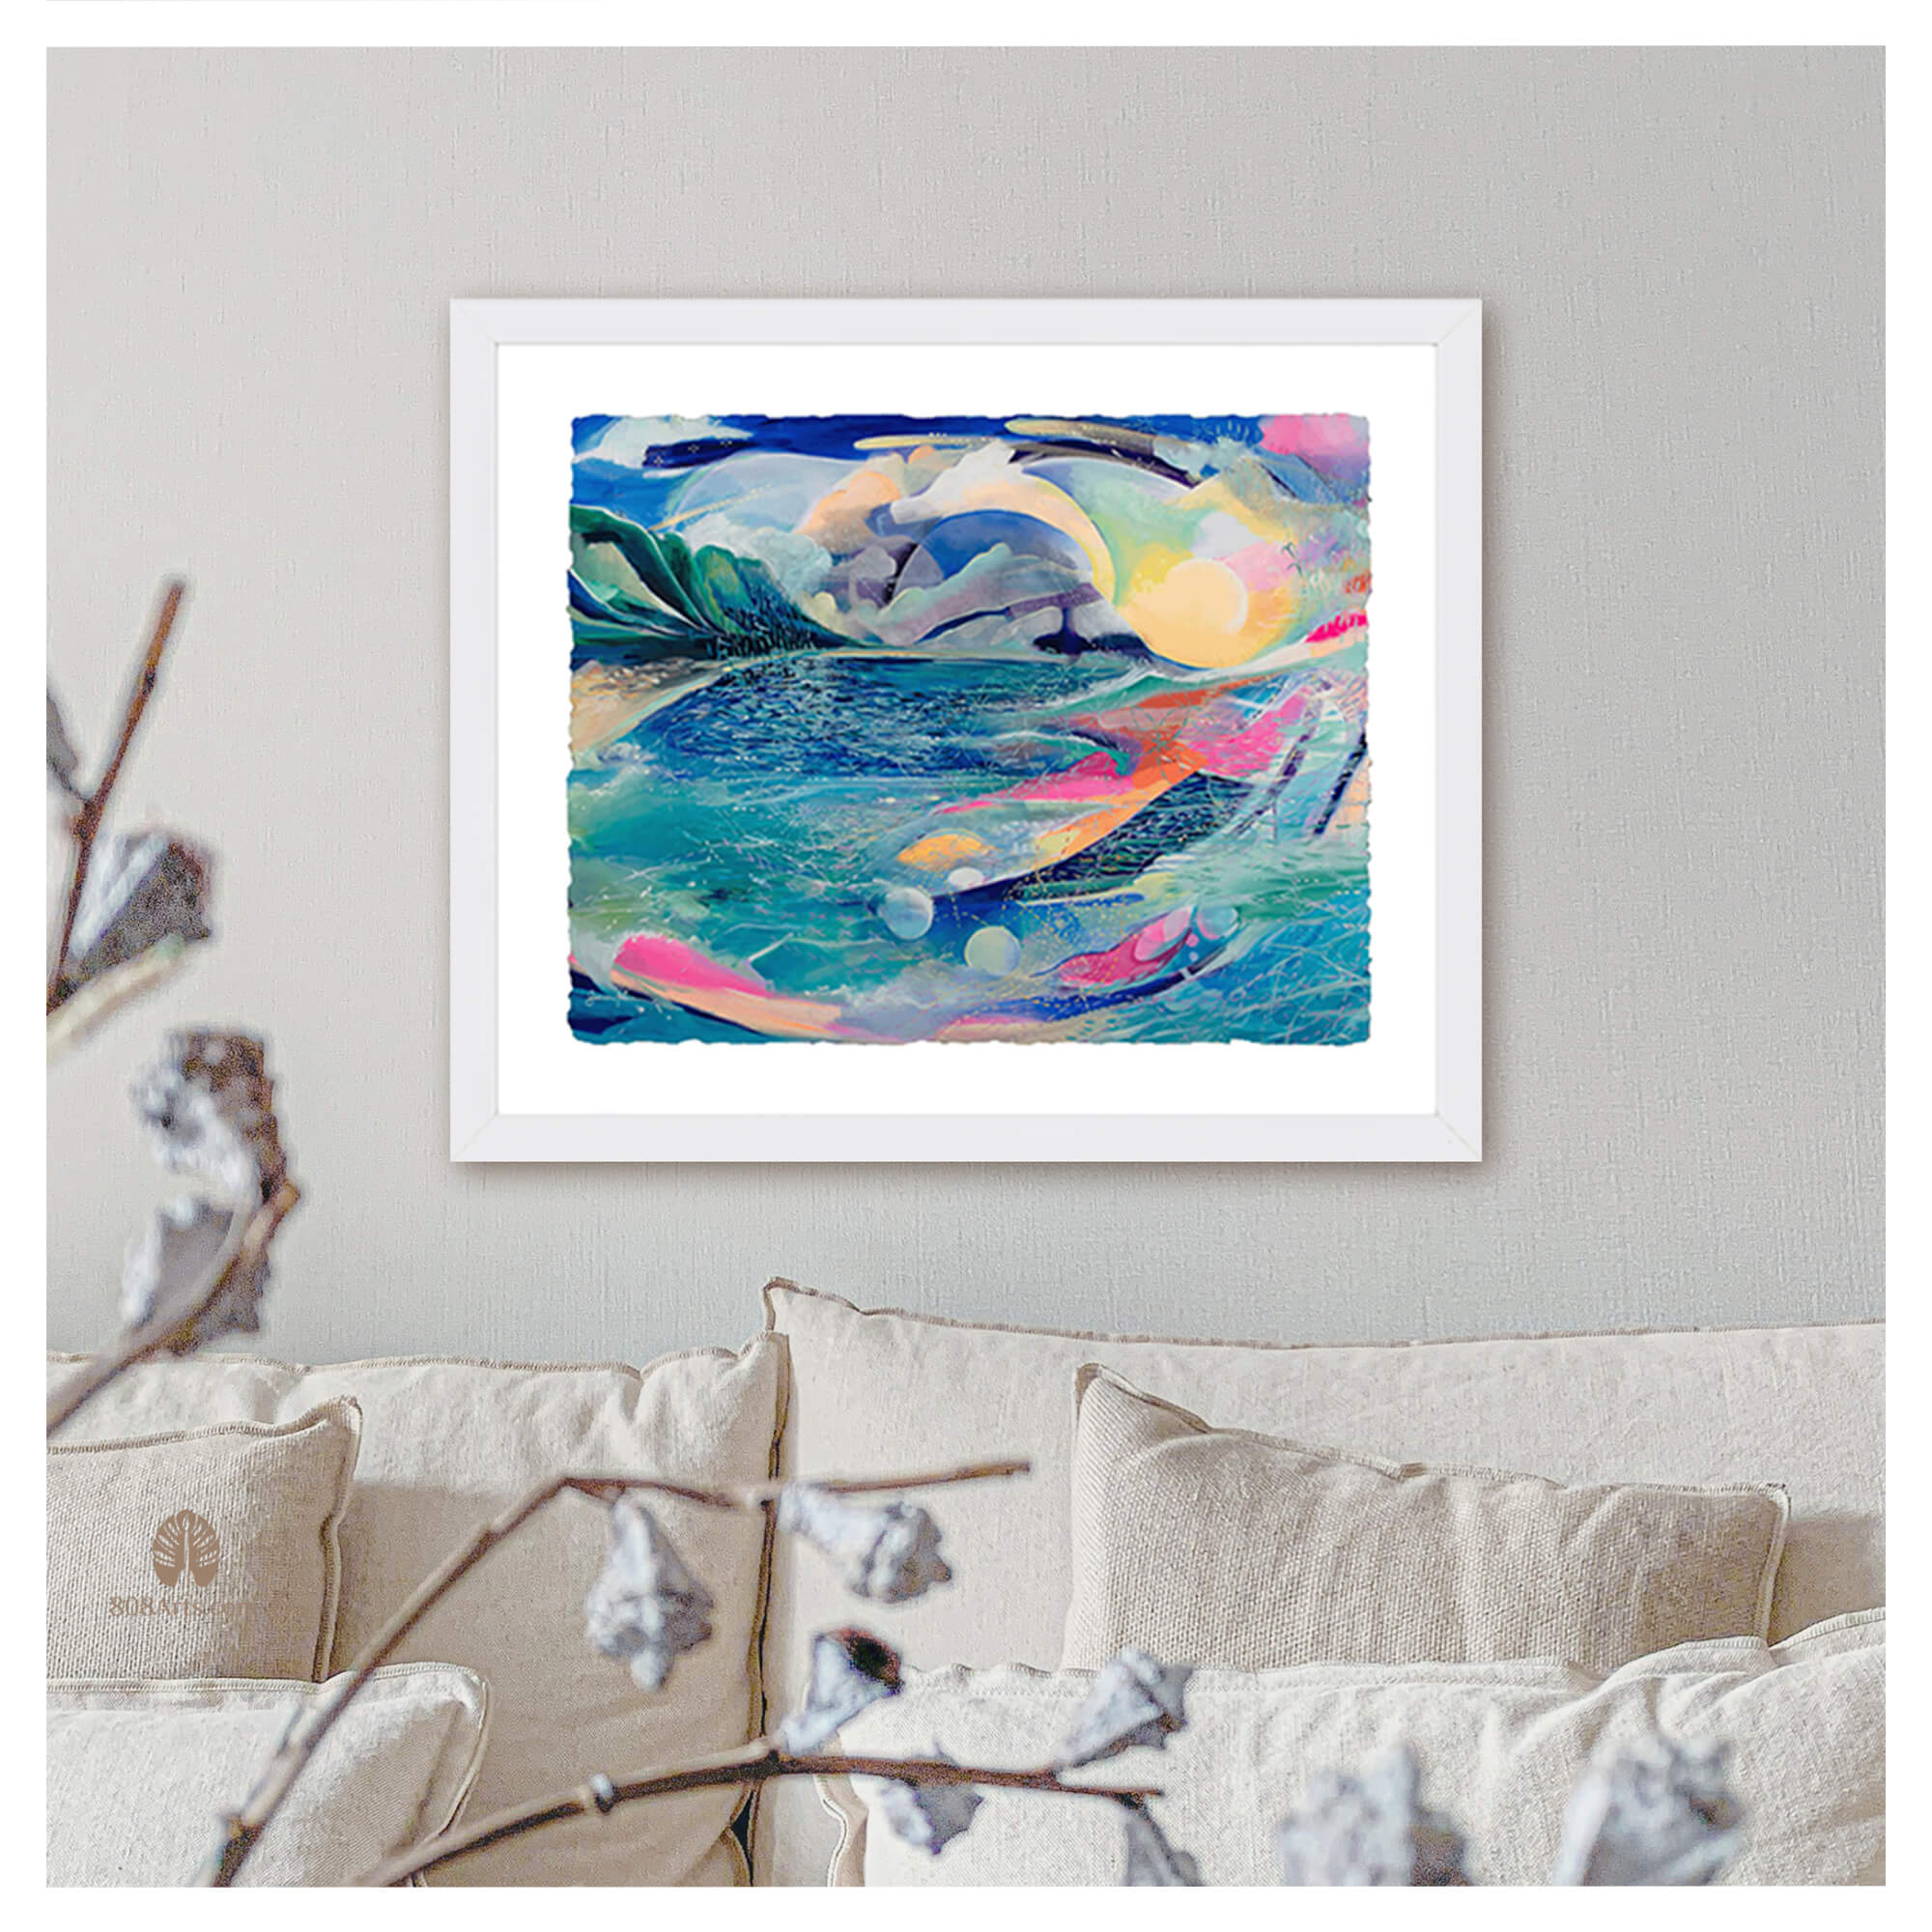 Framed paper art print of an abstract artwork of a seascape with vibrant pastel colors Hawaii artist Saumolia Puapuaga